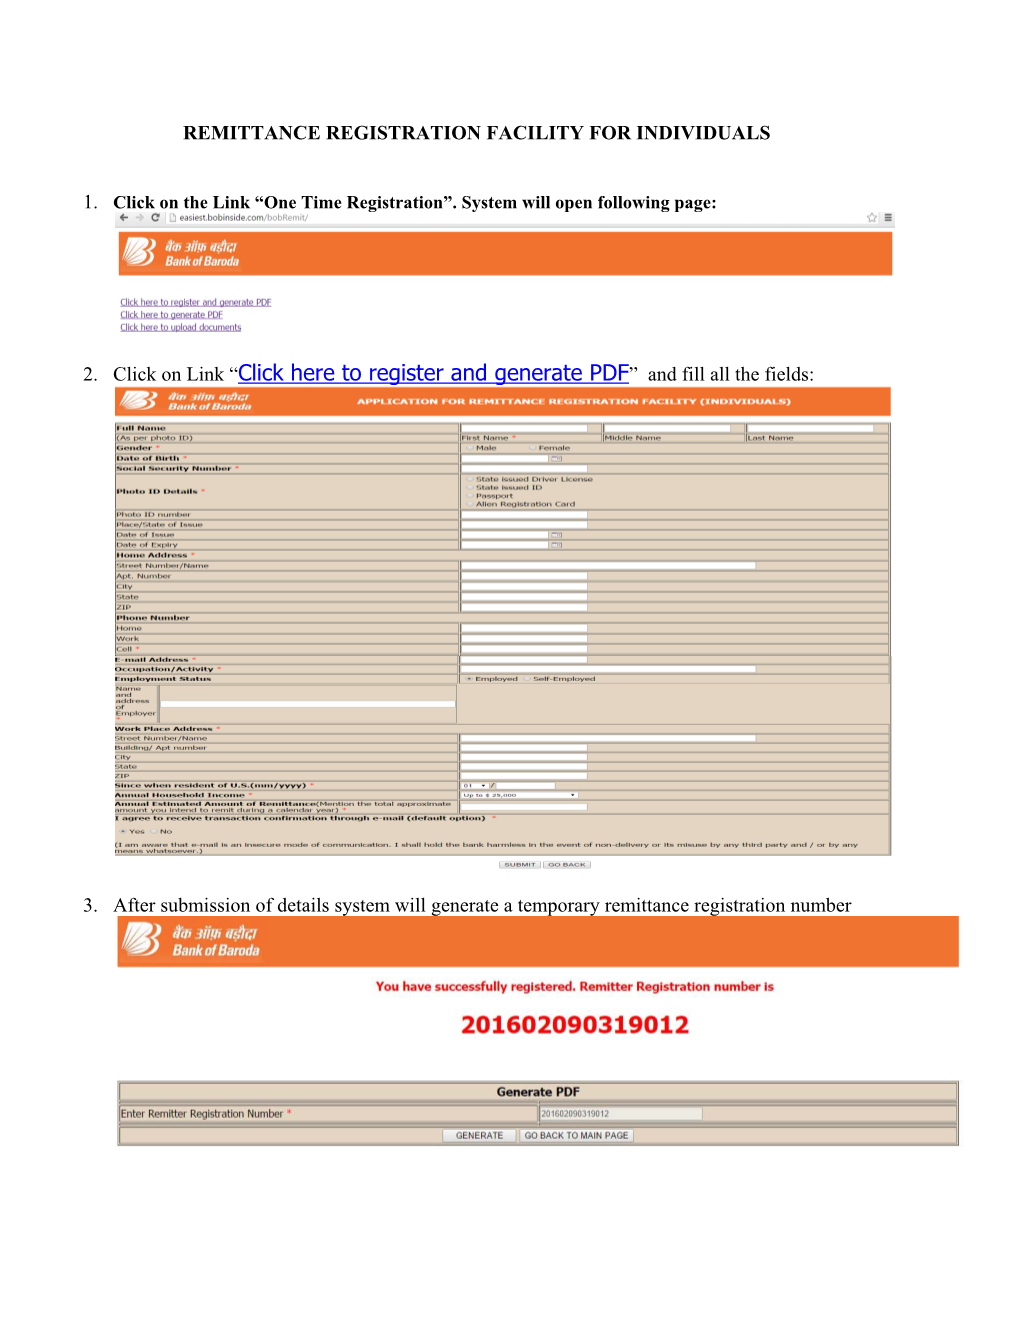 To Register and Generate PDF” and Fill All the Fields